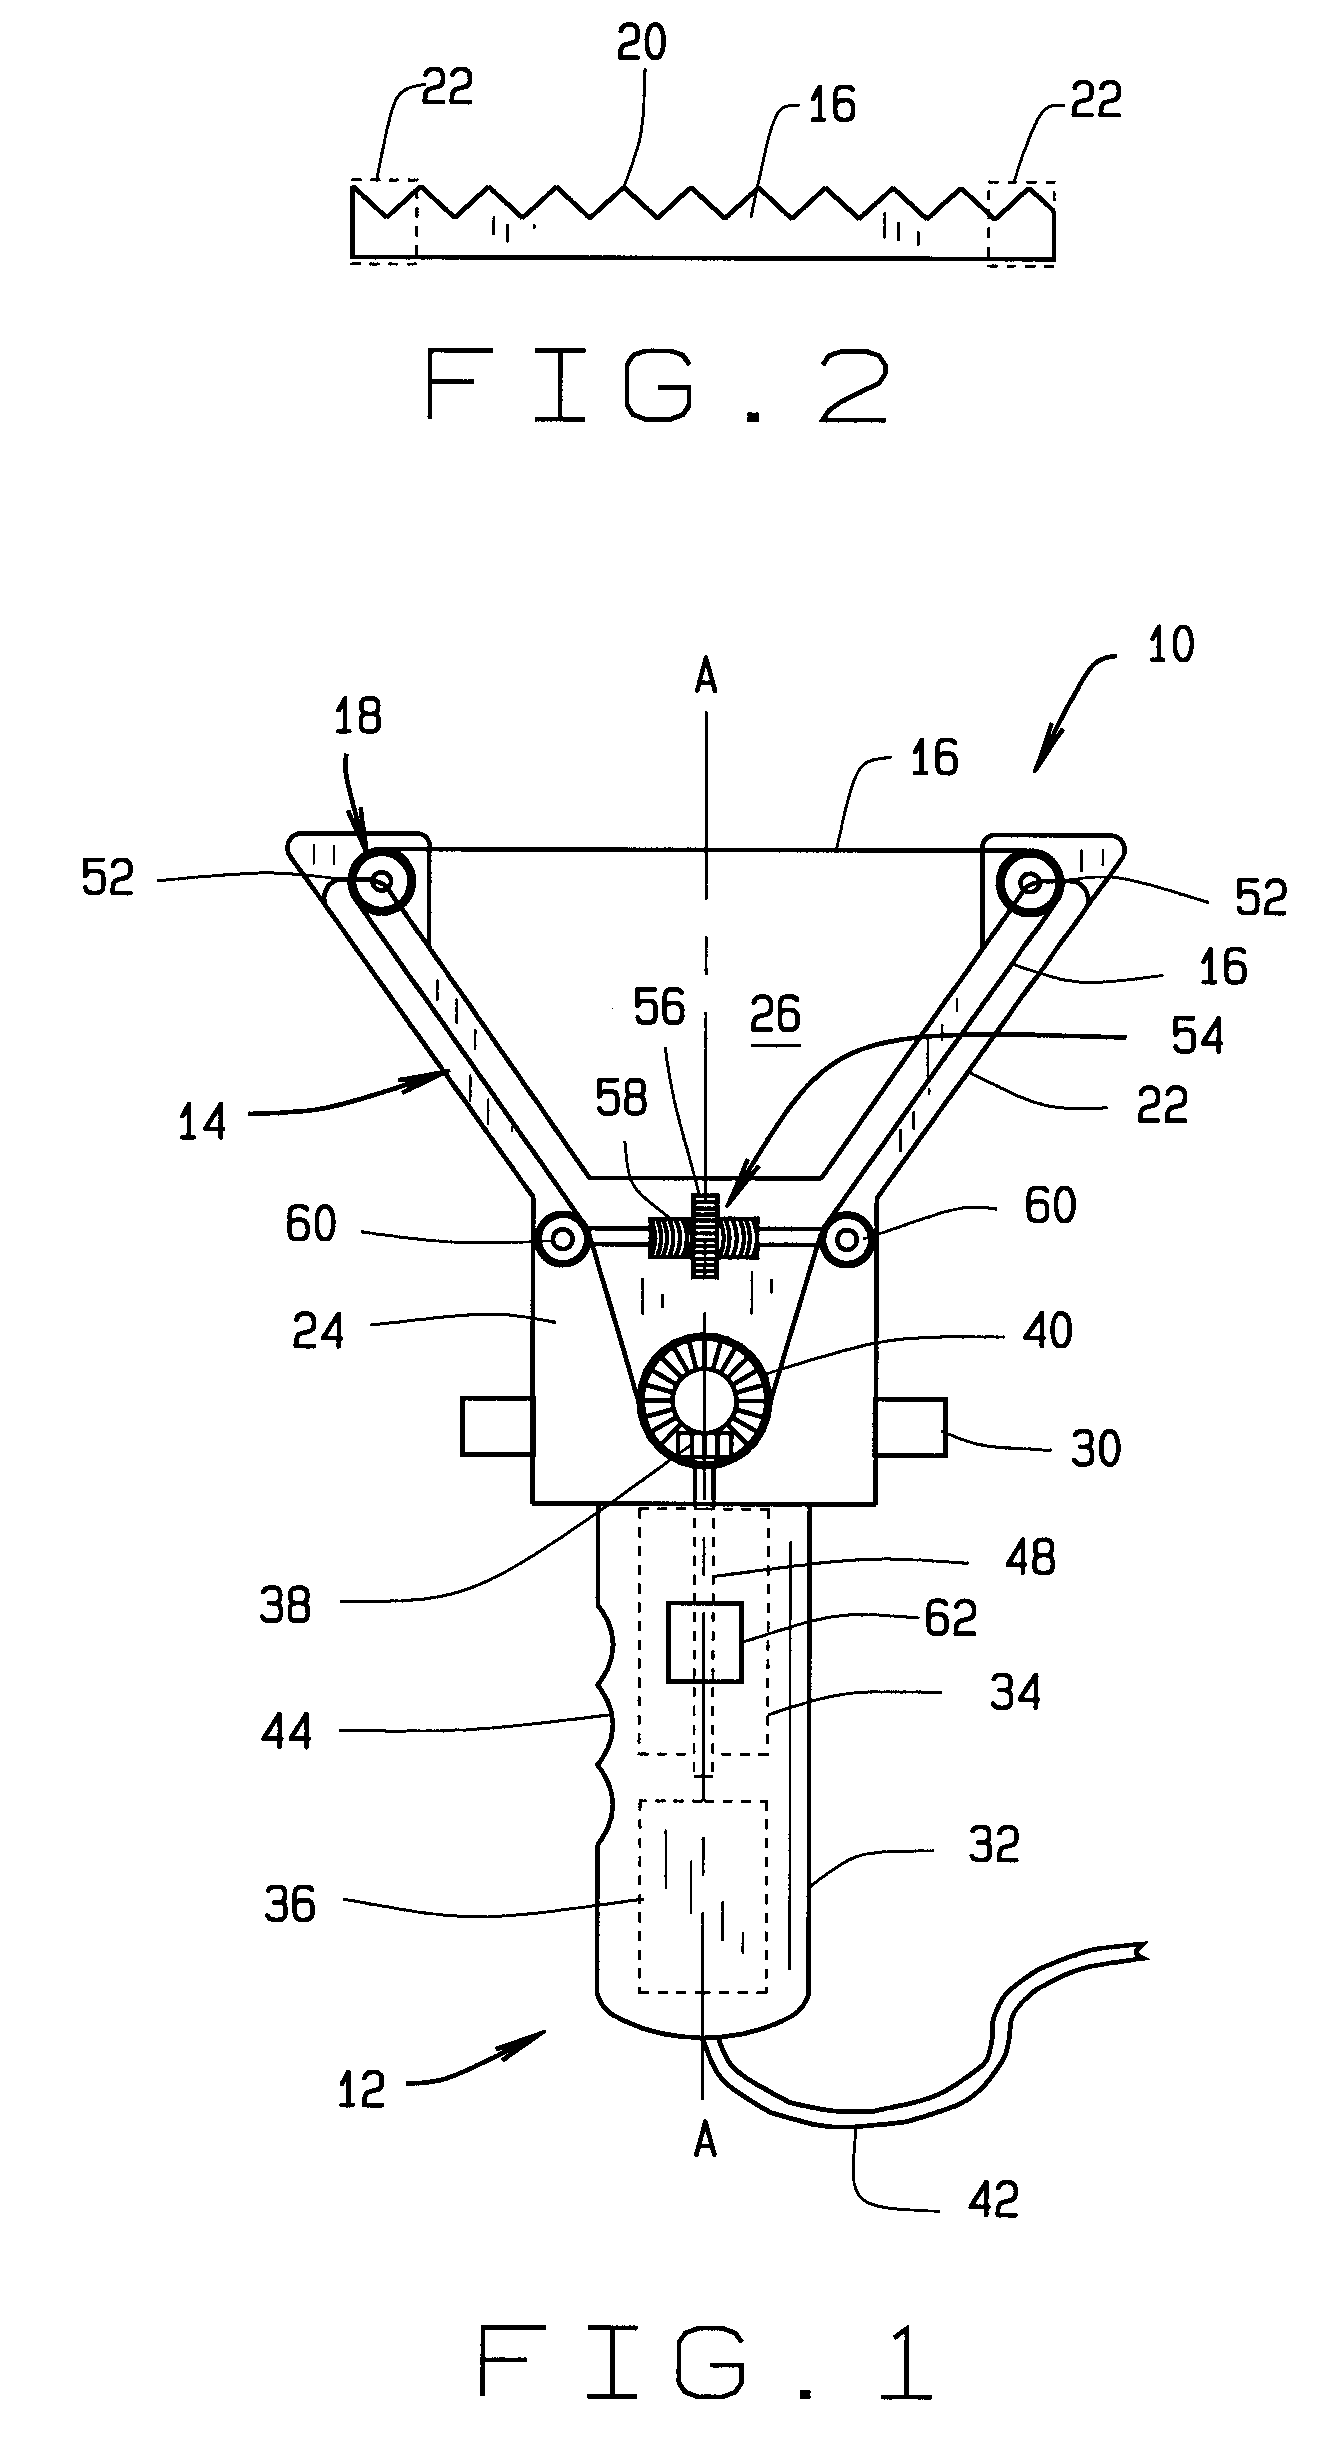 Removeable attachment for a powered tool